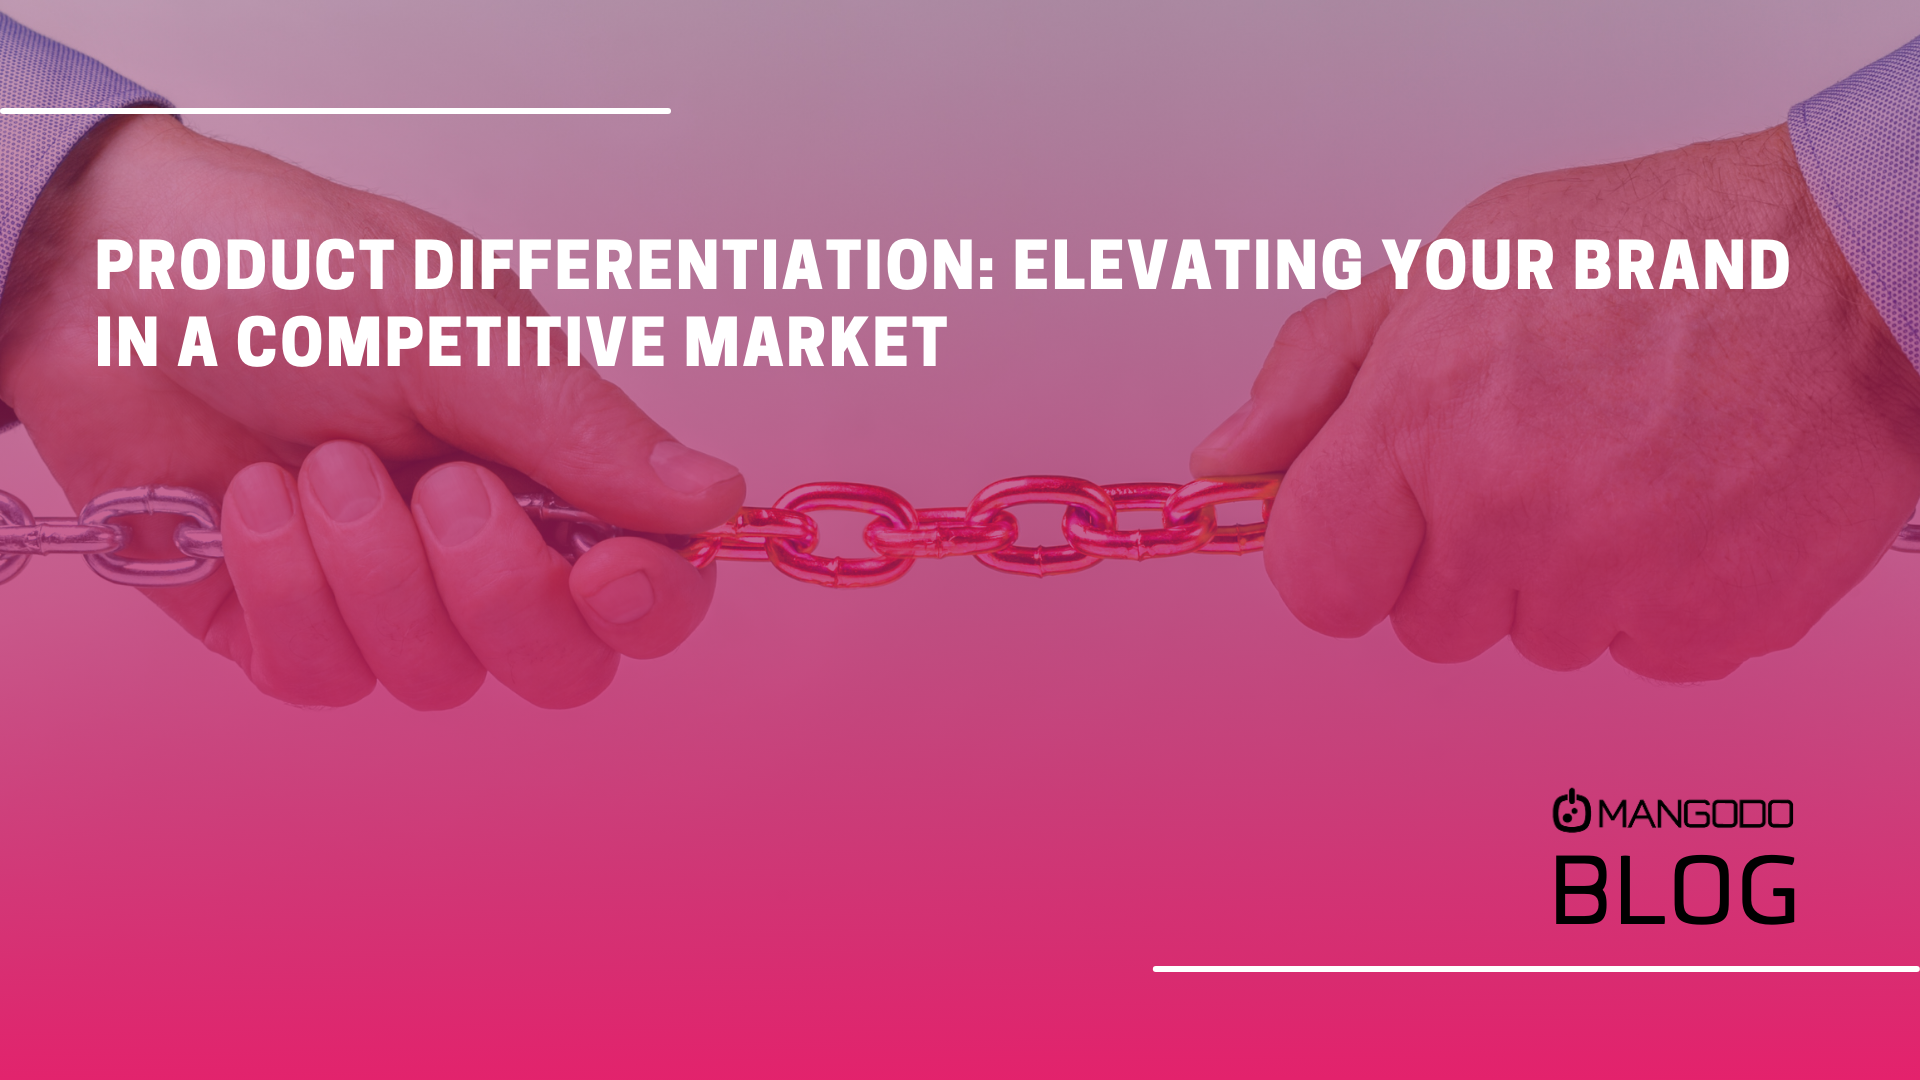 Product Differentiation: Elevating Your Brand in a Competitive Market